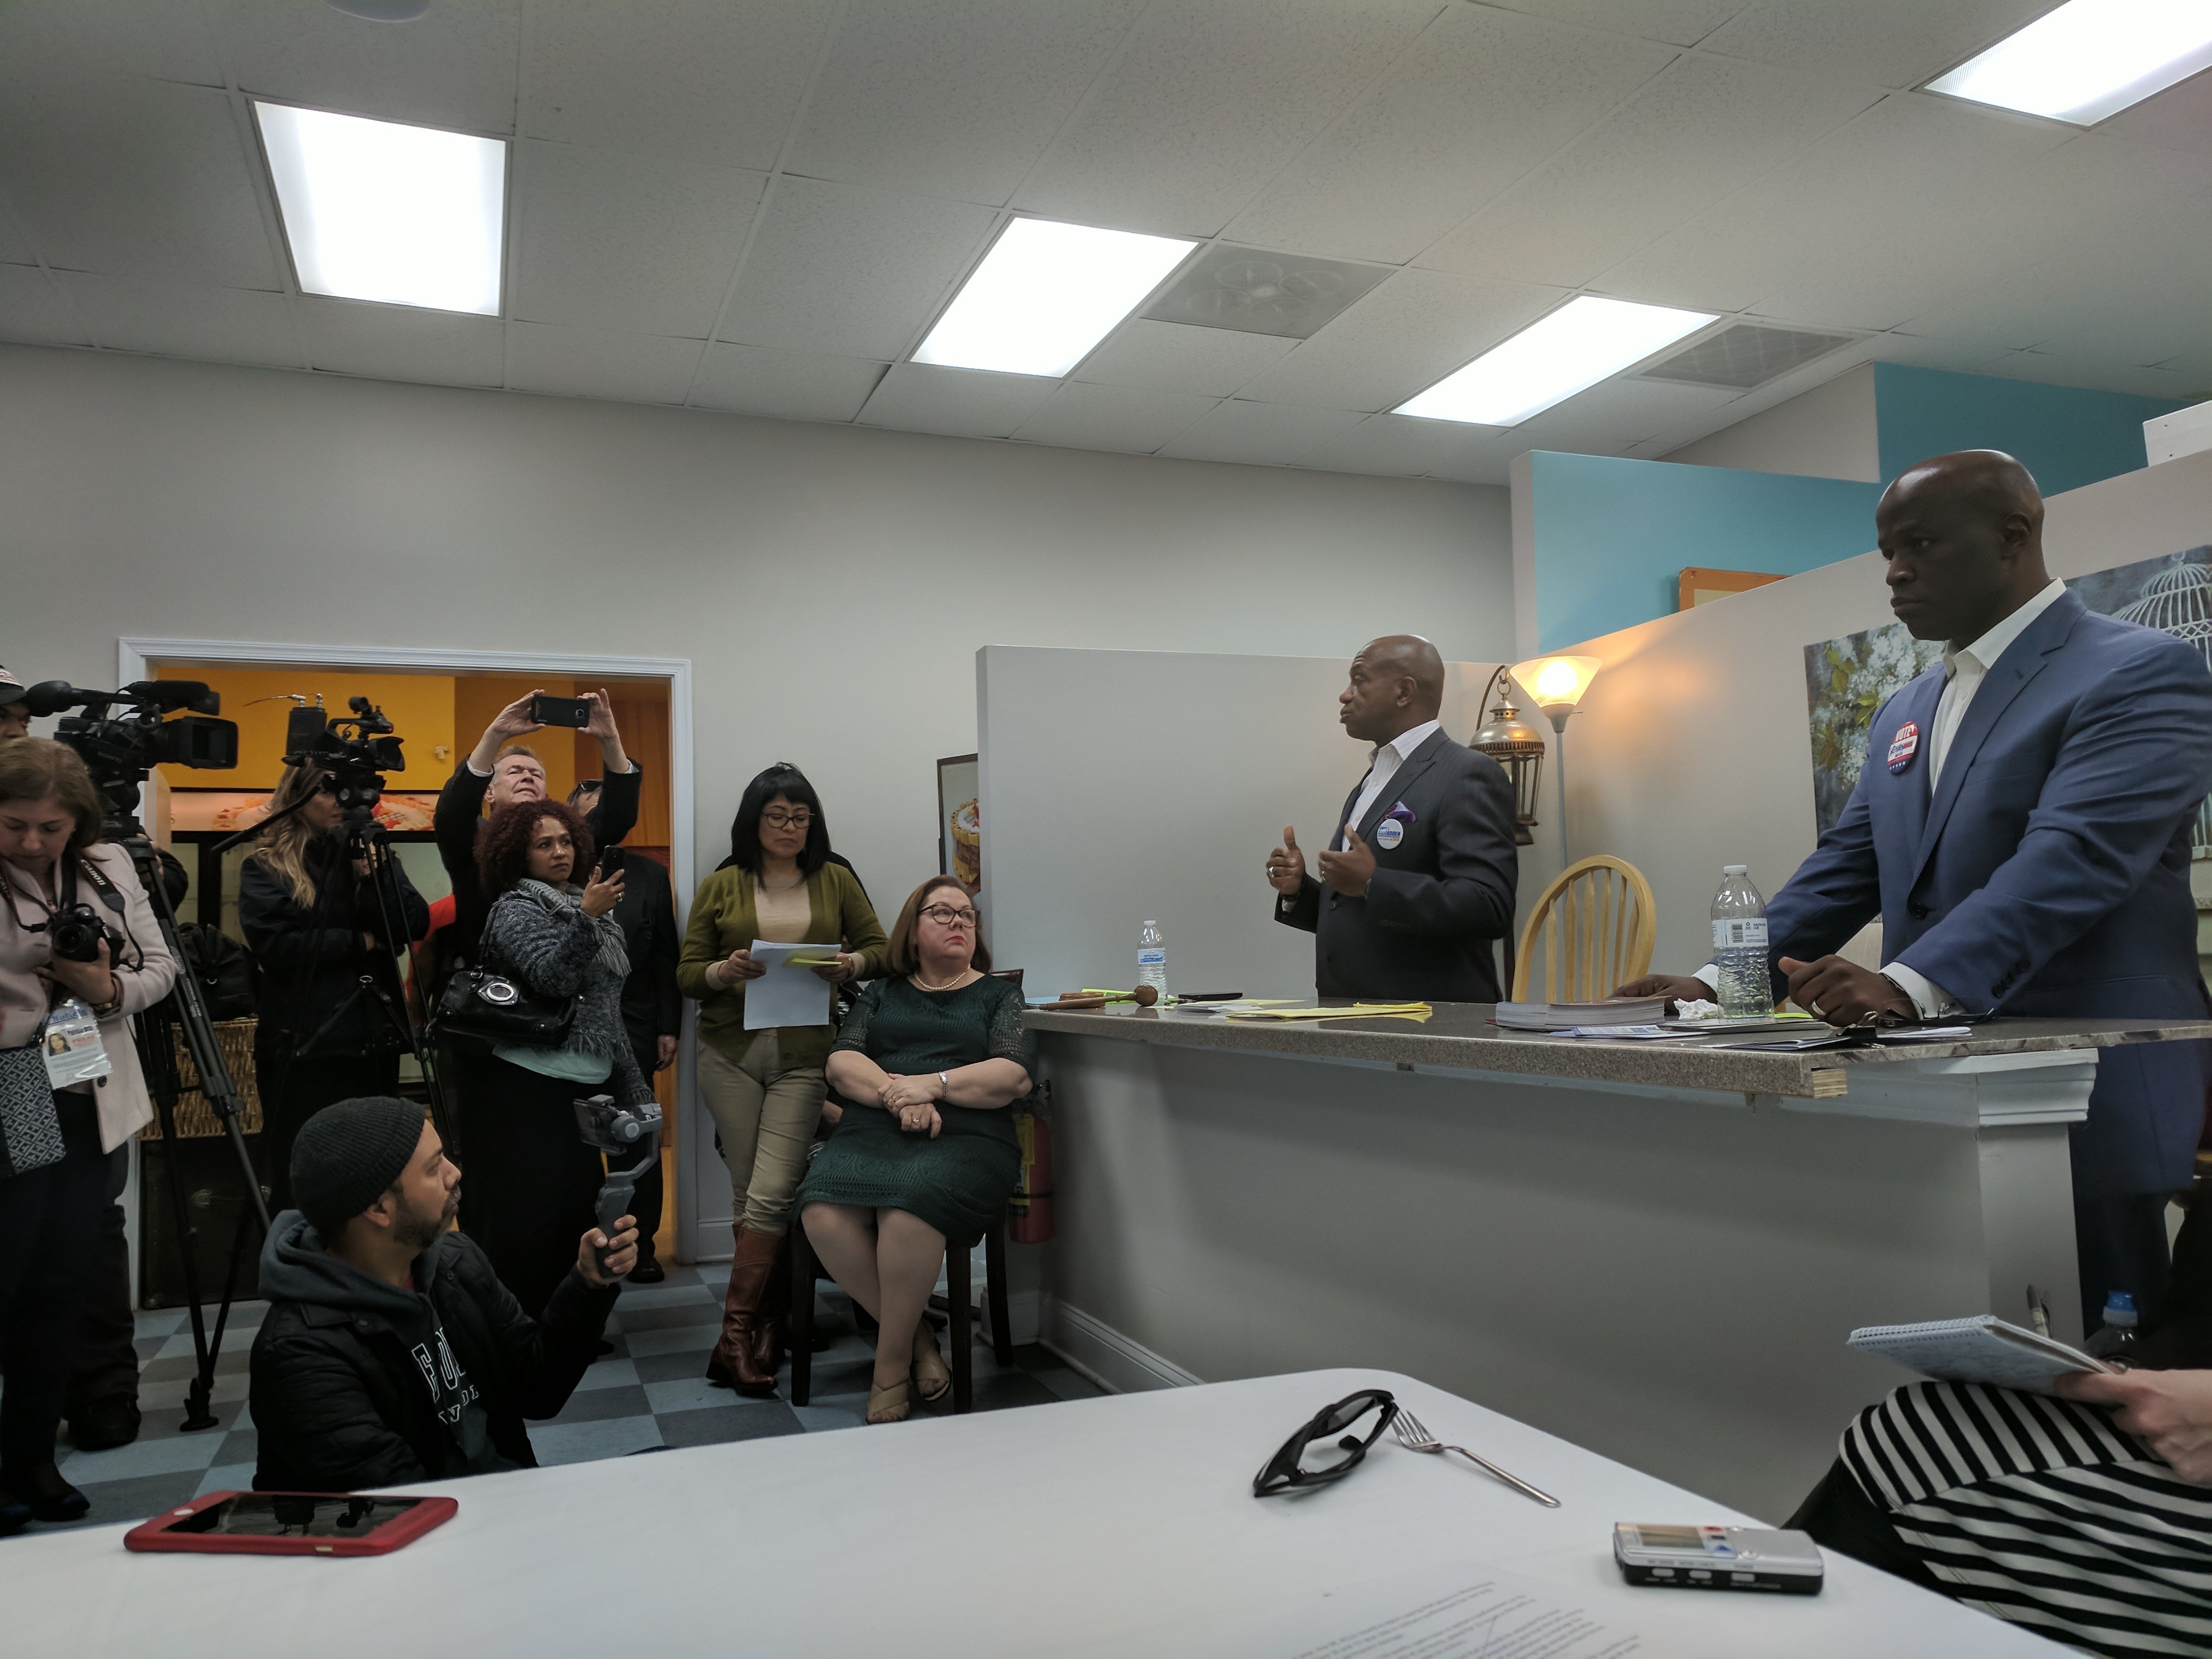 Candidates Gary McFadden [left] and Antoine Ensley at a recent debate in Las Delicias Bakery in east Charlotte. (Photos by Ryan Pitkin)